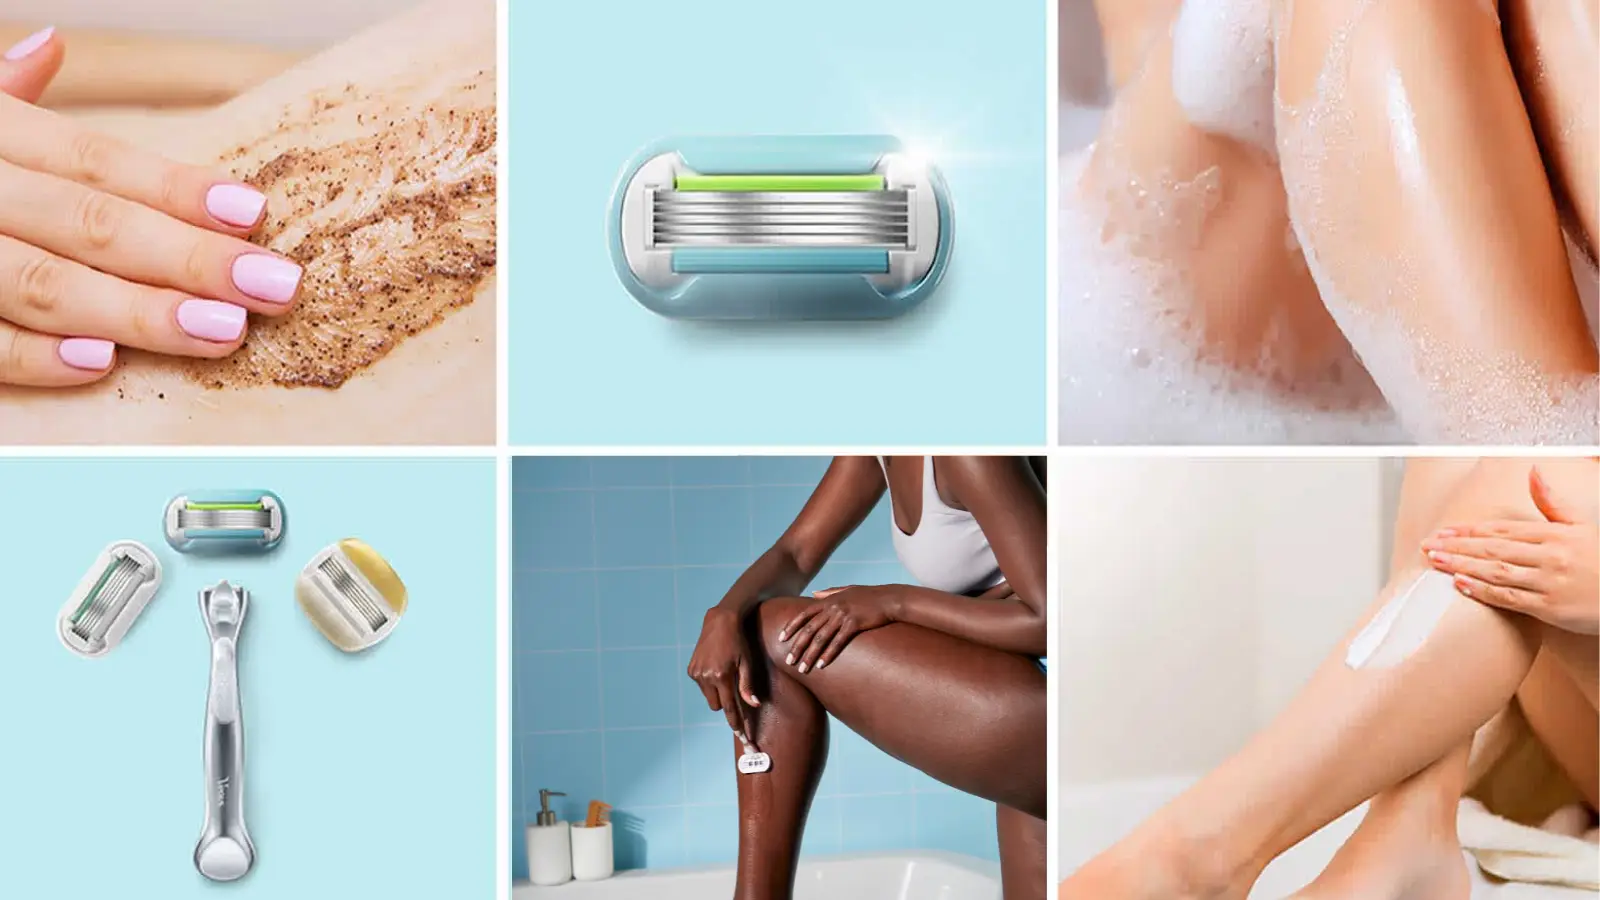 Woman applying brown scrubbing product to her skin, oval 5 bladed razor head with a blue lubastrip, female legs in a bubbly bath, silver razor with three detached oval razor heads above it, woman shaving her leg with a razor, woman applying cream to her leg